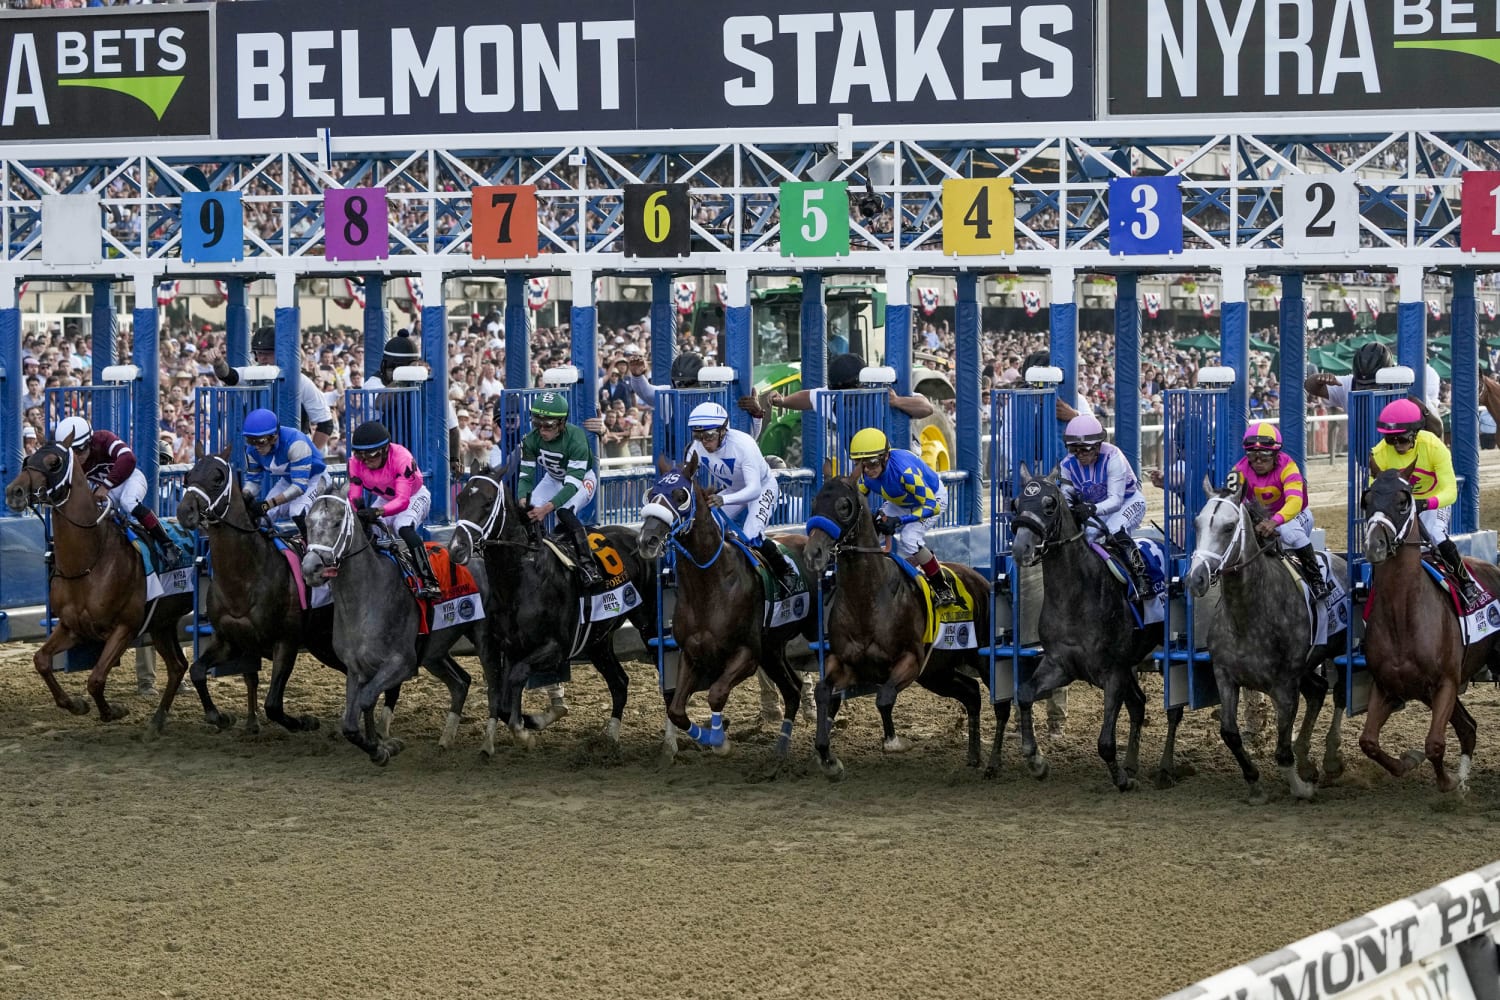 After a historymaking event, horses die in backtoback races at